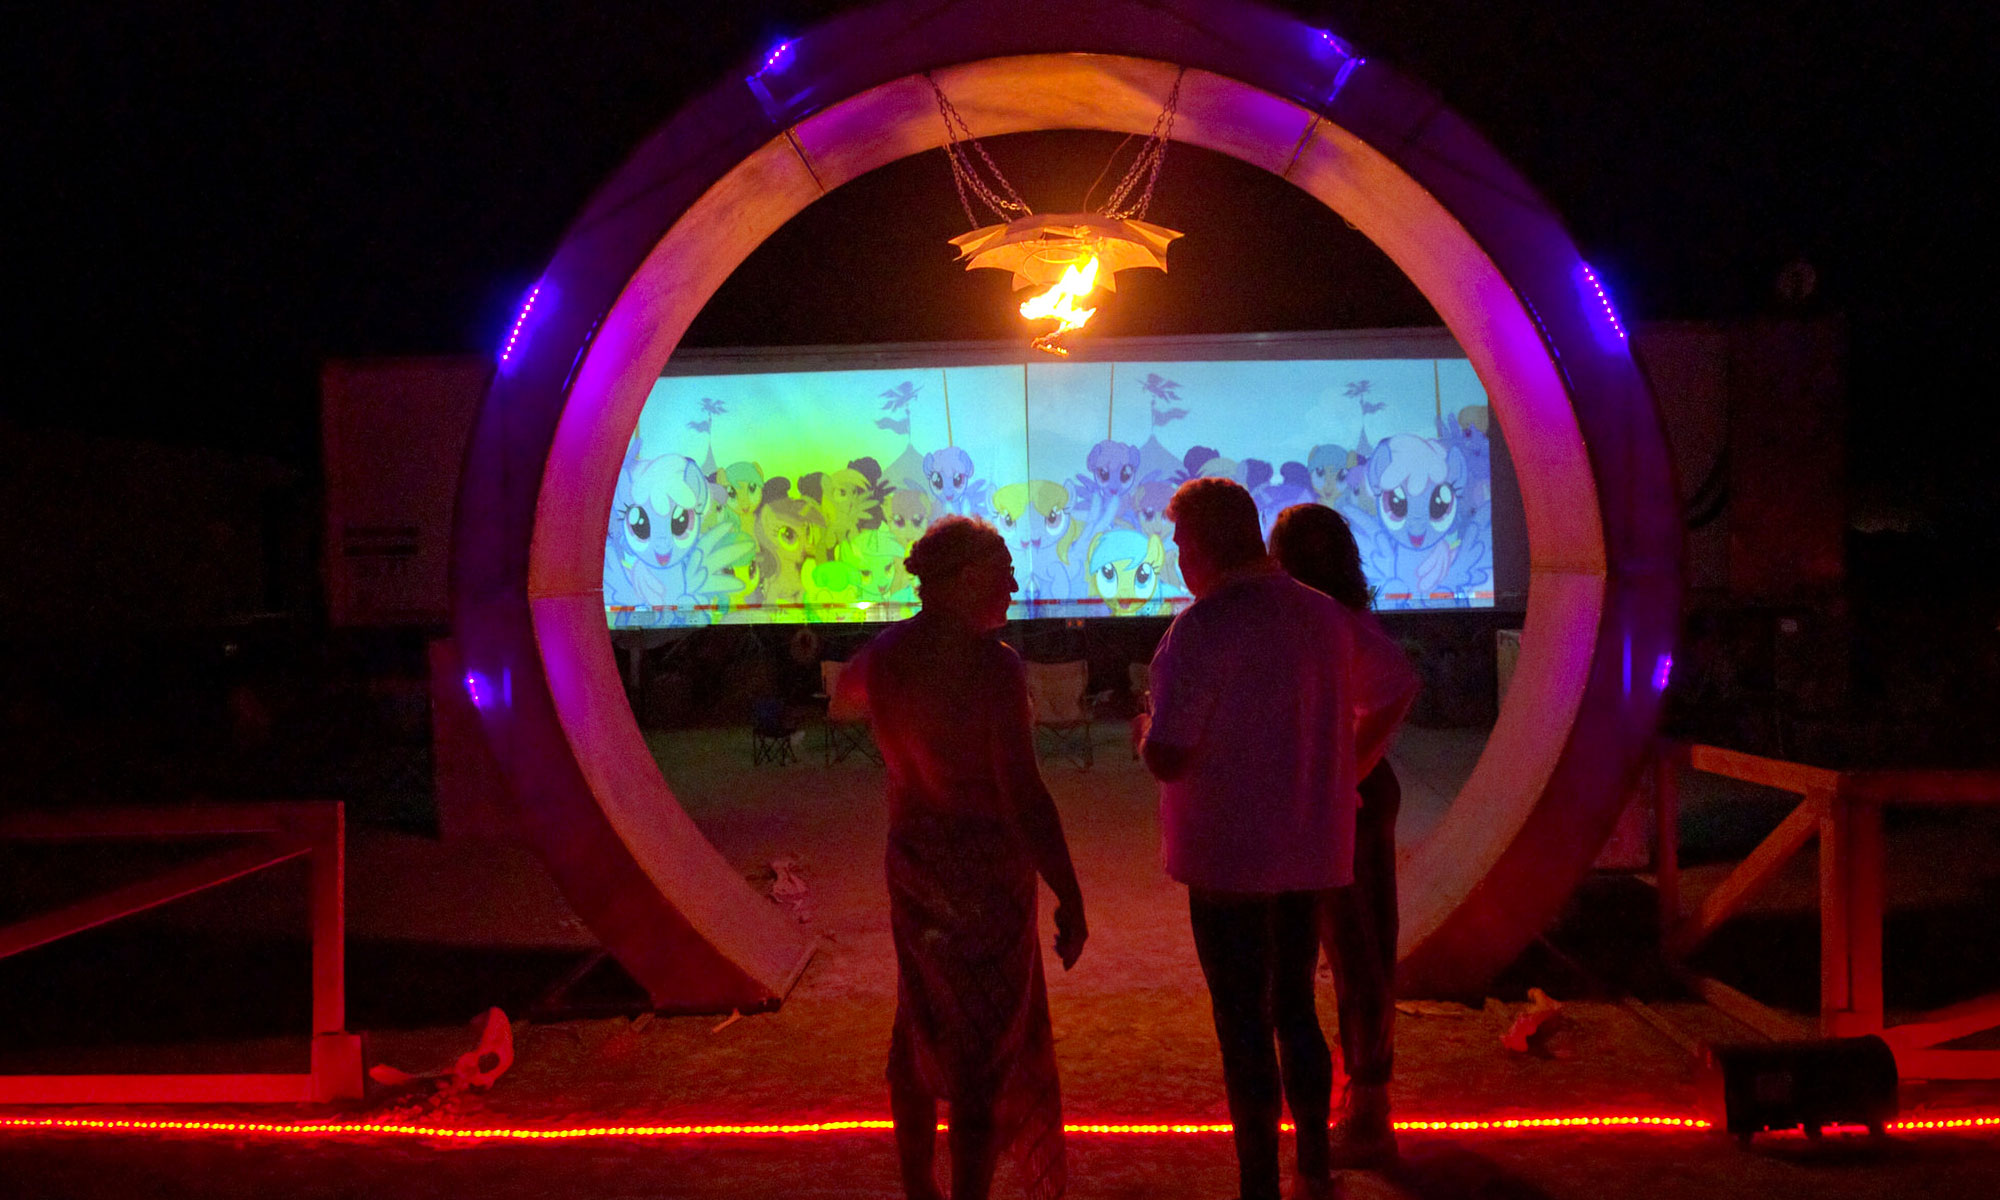 Liminals viewing movies through Moon Gate